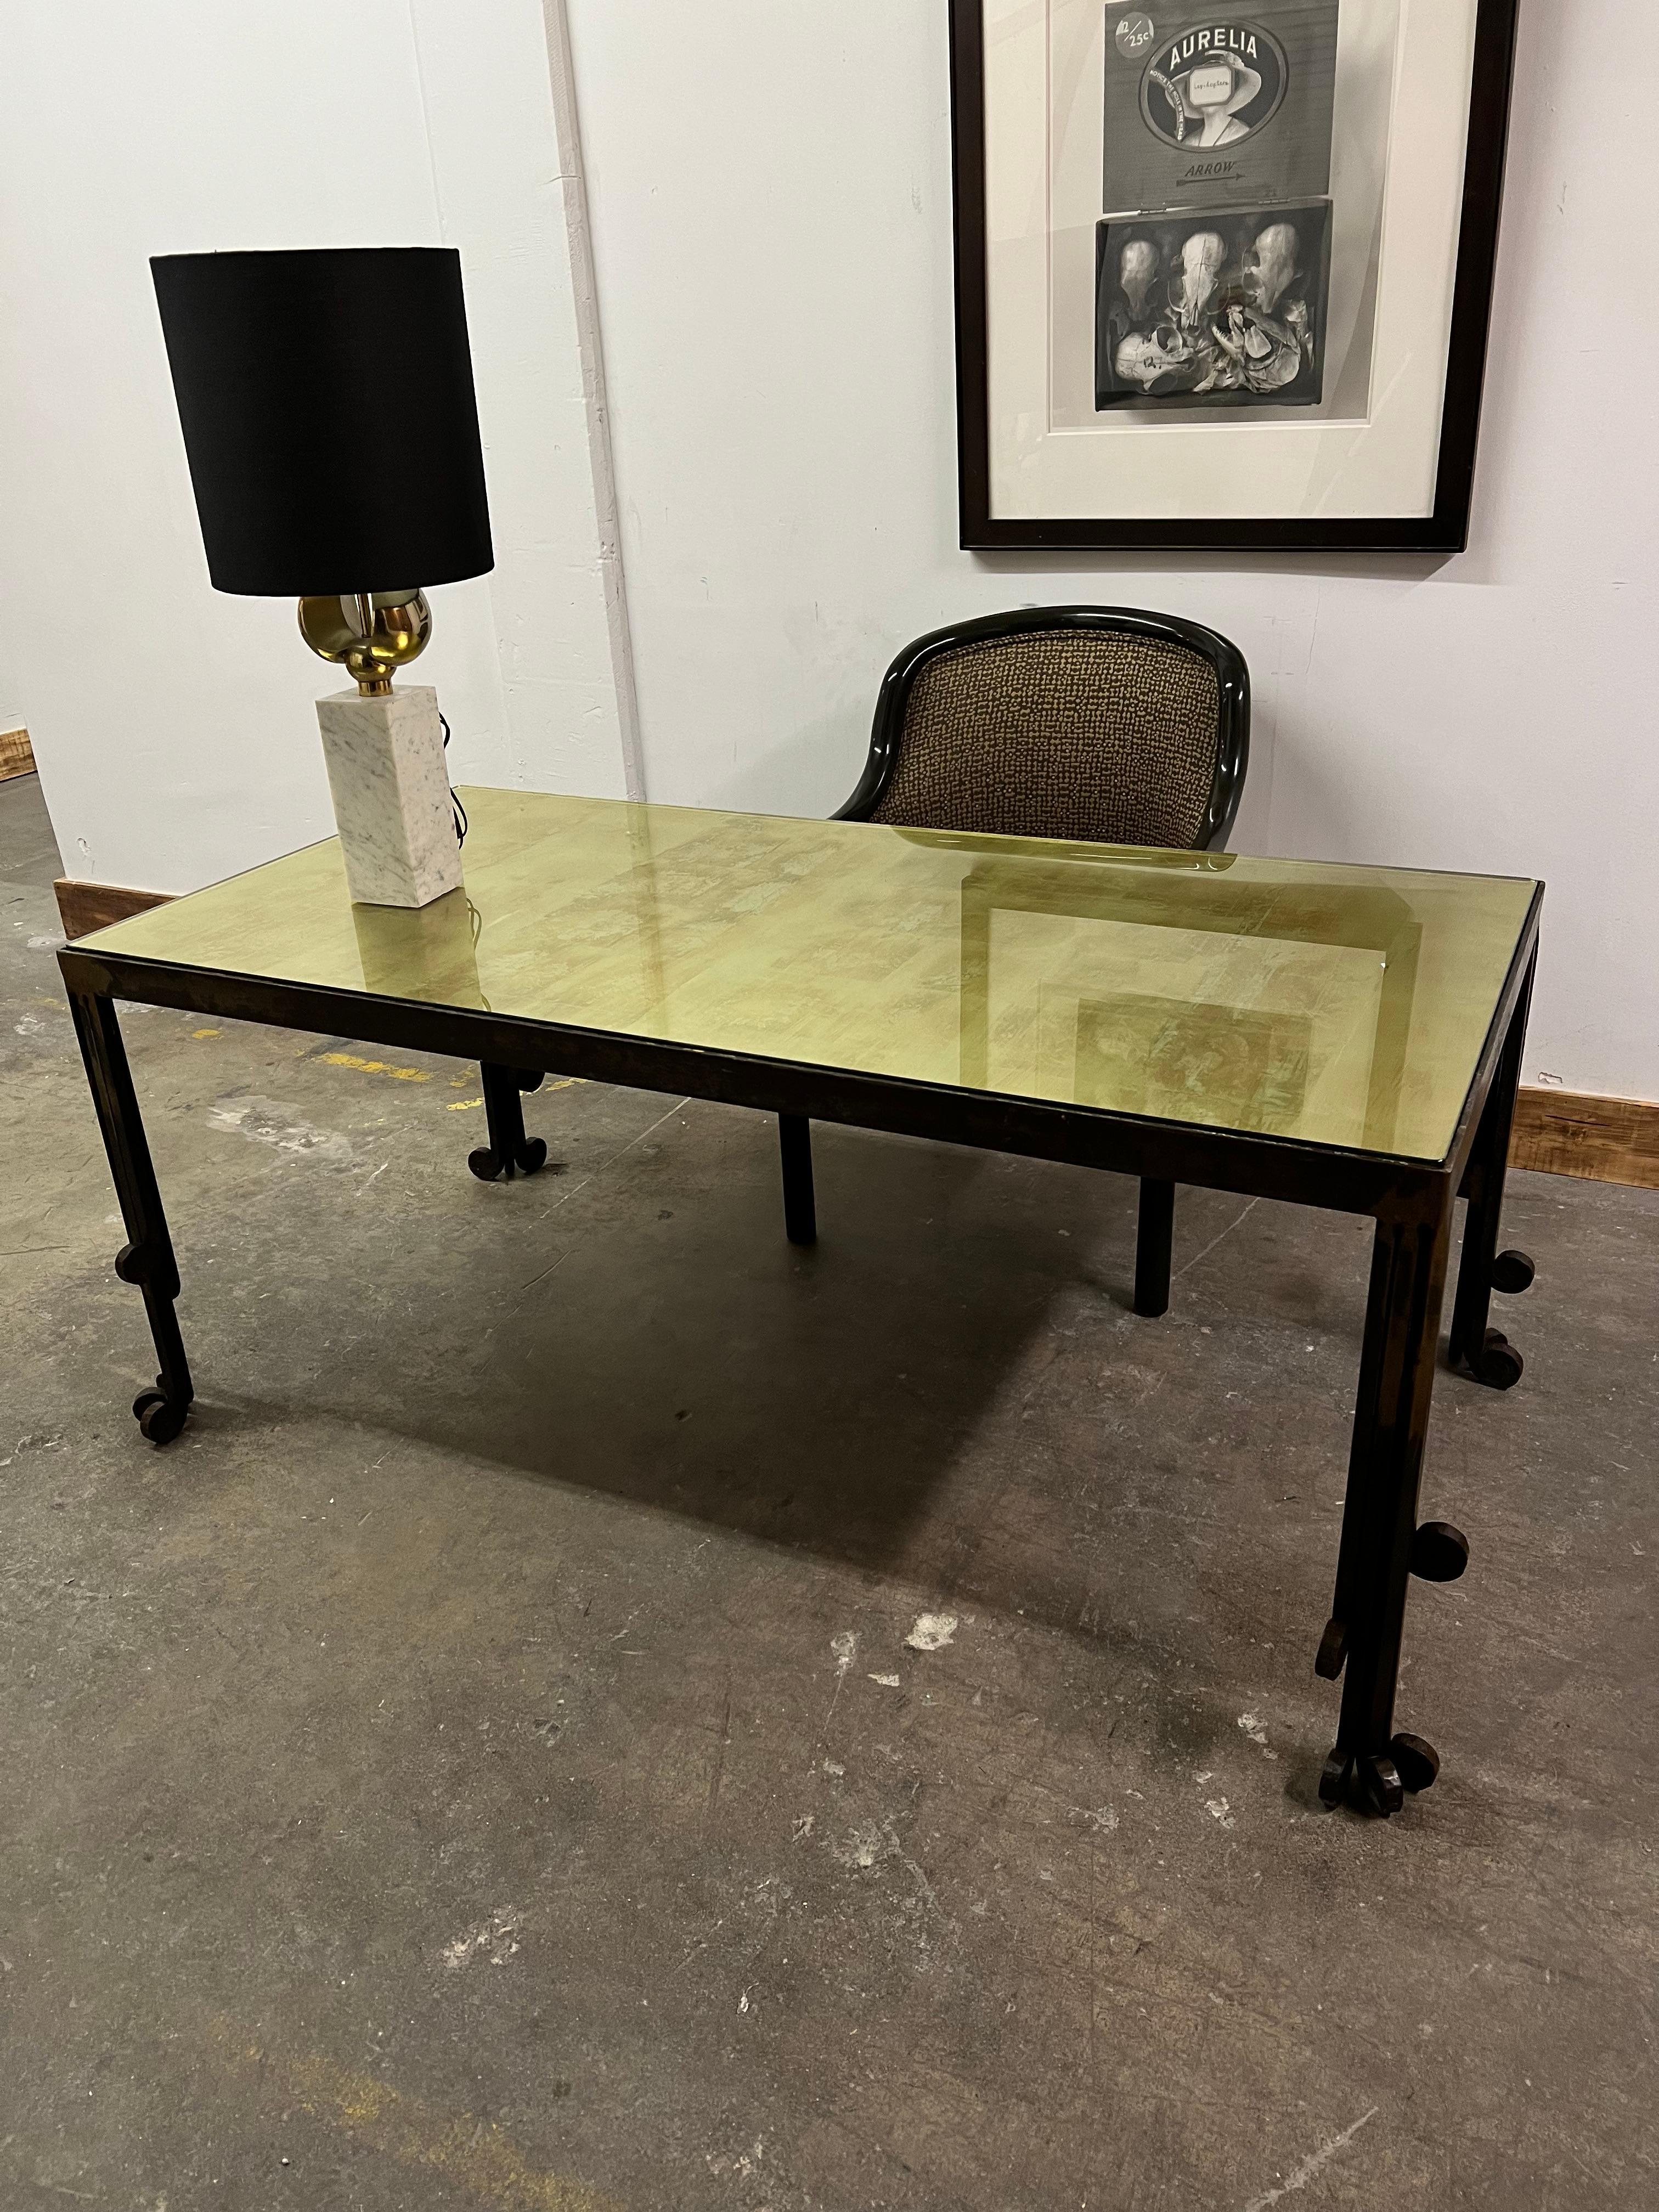 Hand-crafted French Deco wrought iron table with very interesting rolled and hammered disks to the lower portion of each leg. A very versatile piece which could be a small dining table, or desk. The drama and craftsmanship also make this a wonderful